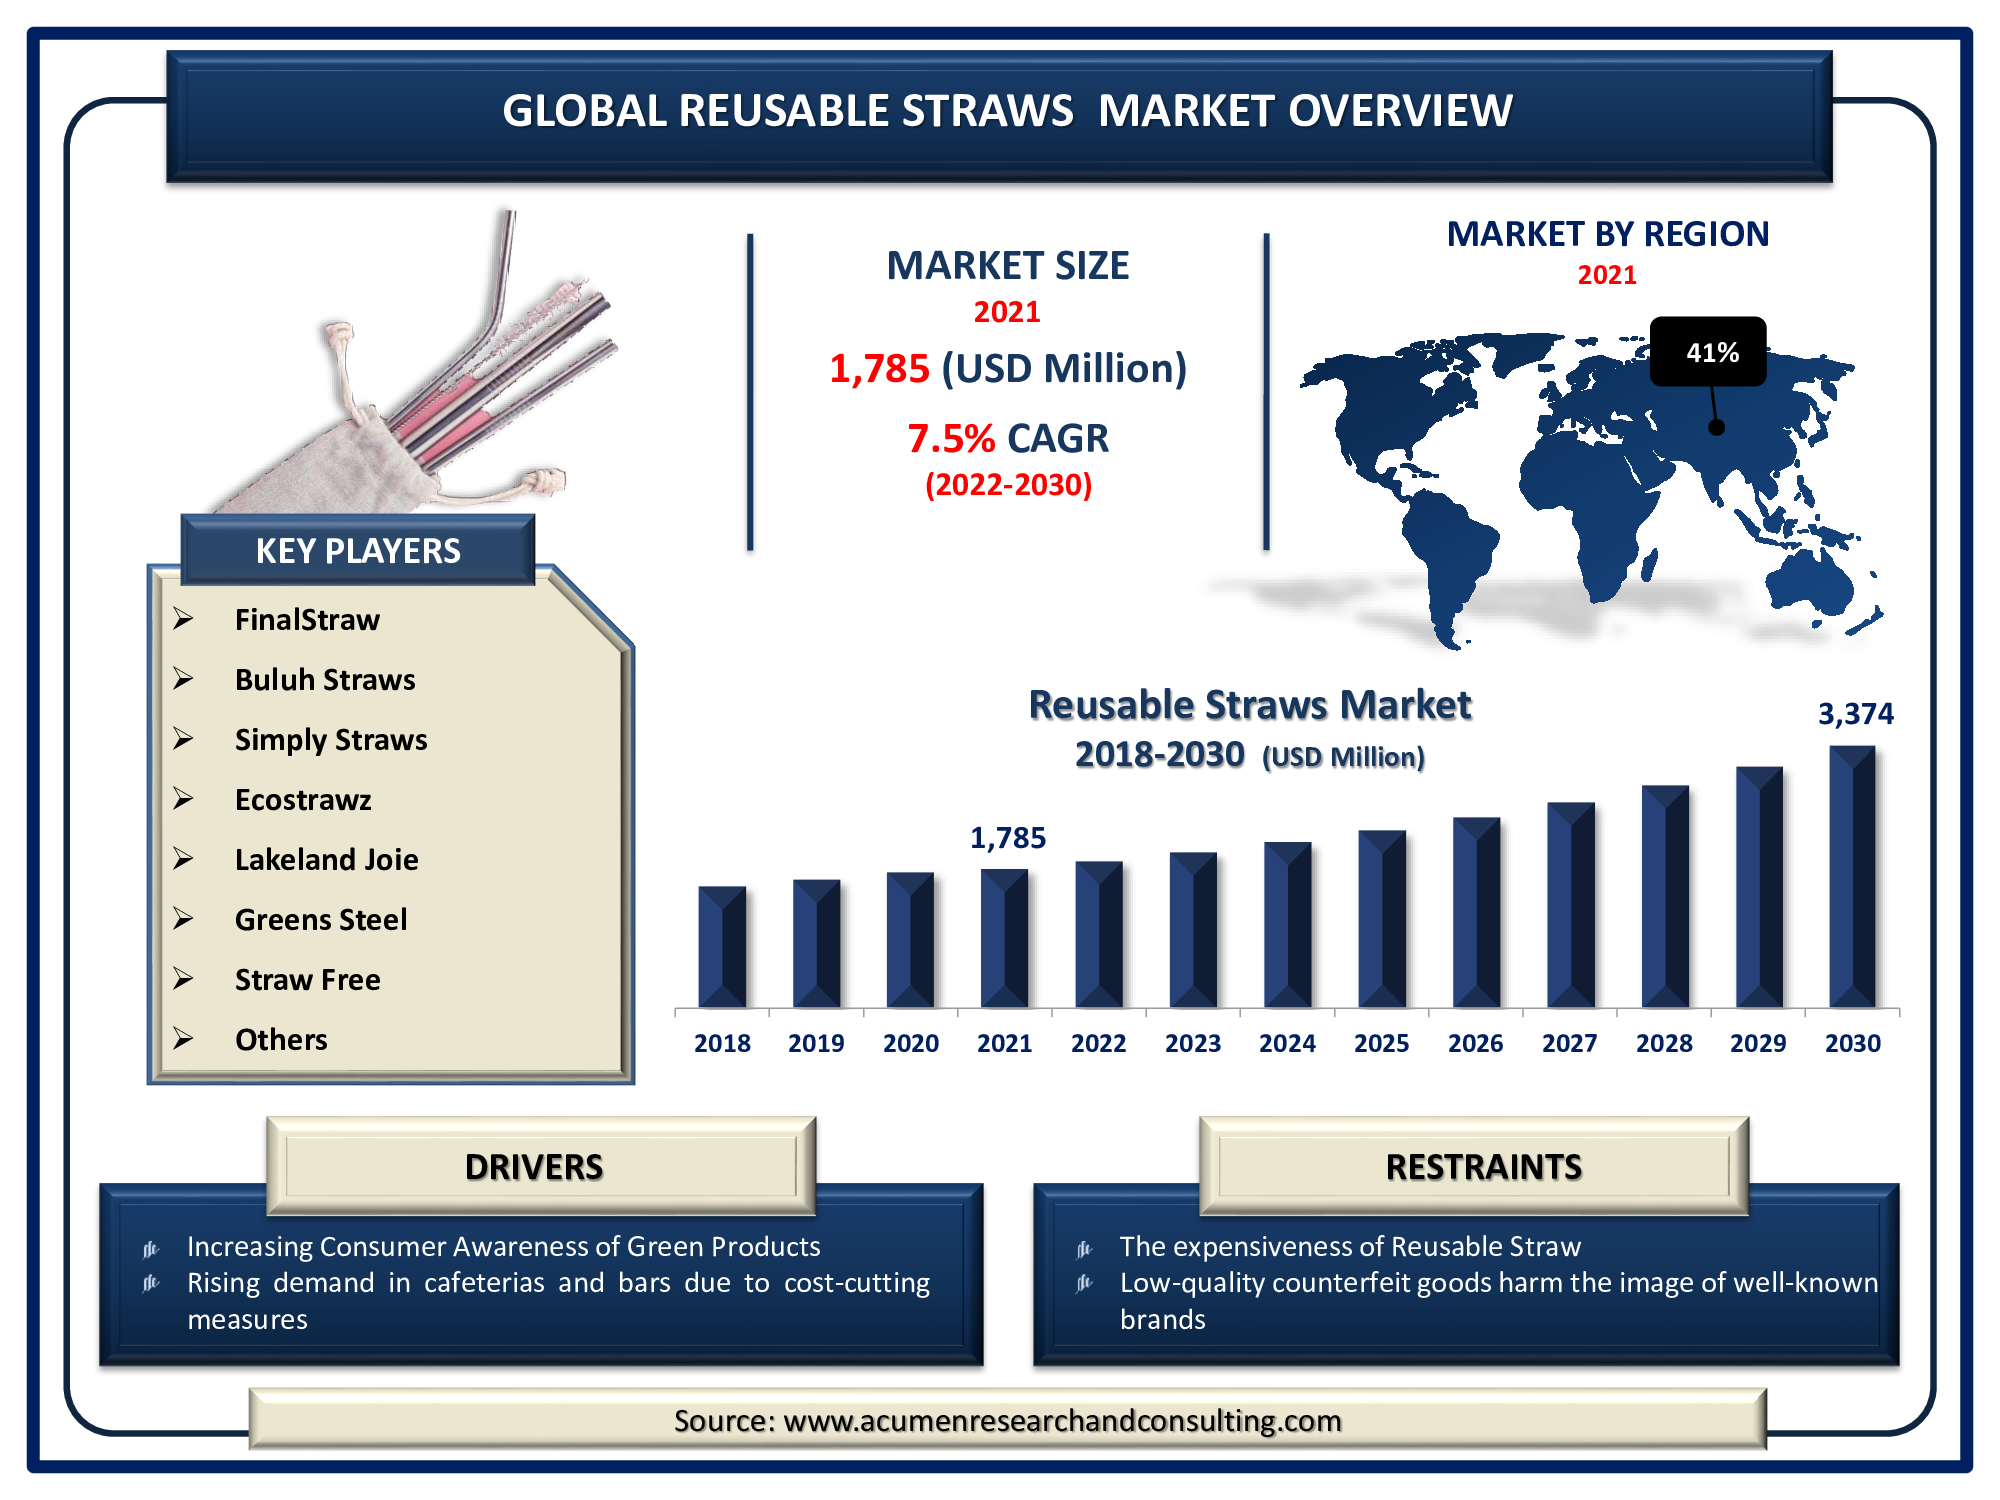 Reusable Straws Market is predicted to be worth USD 3,374 Million by 2030, with a CAGR of 7.5%